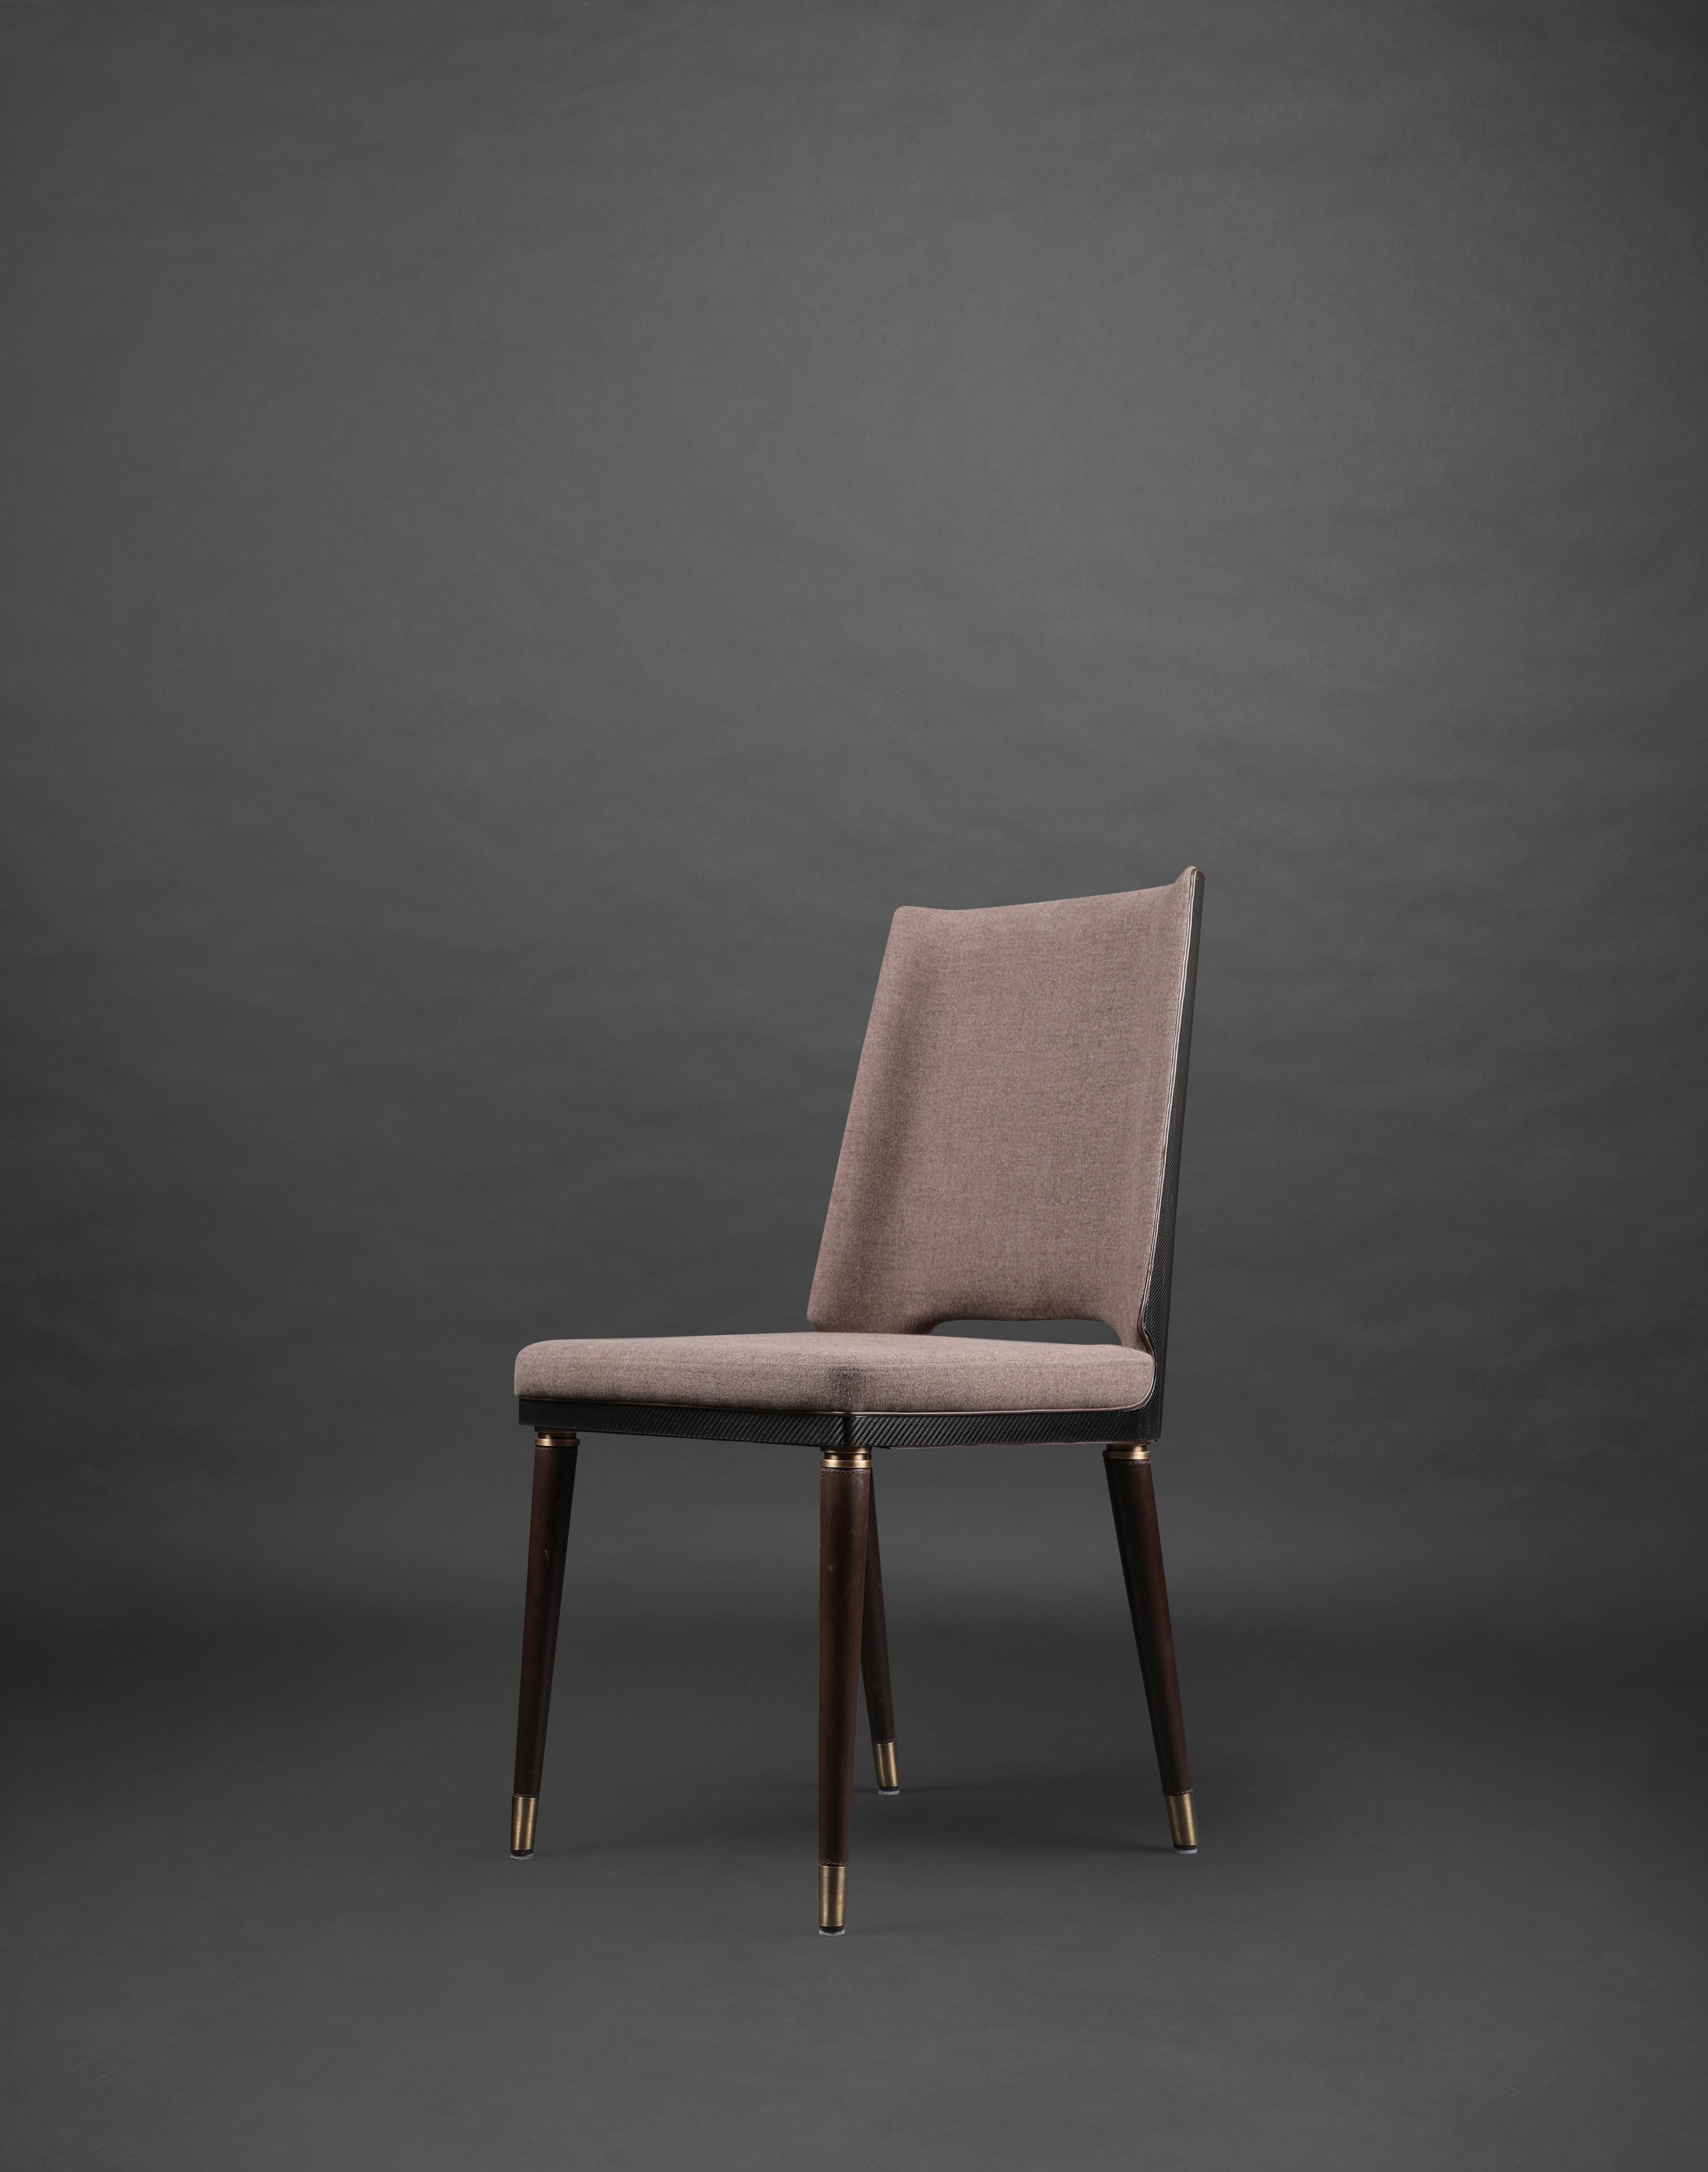 Carbon fibre irving dining chair by Madheke.
Dimensions: W 56 D 51 H 91 cm.
Materials: carbon fibre, metal.

Carbon fibre chair back with upholstered seat. Seamless carbon fibre leg detailed with metal trim.

Reflecting the finest in